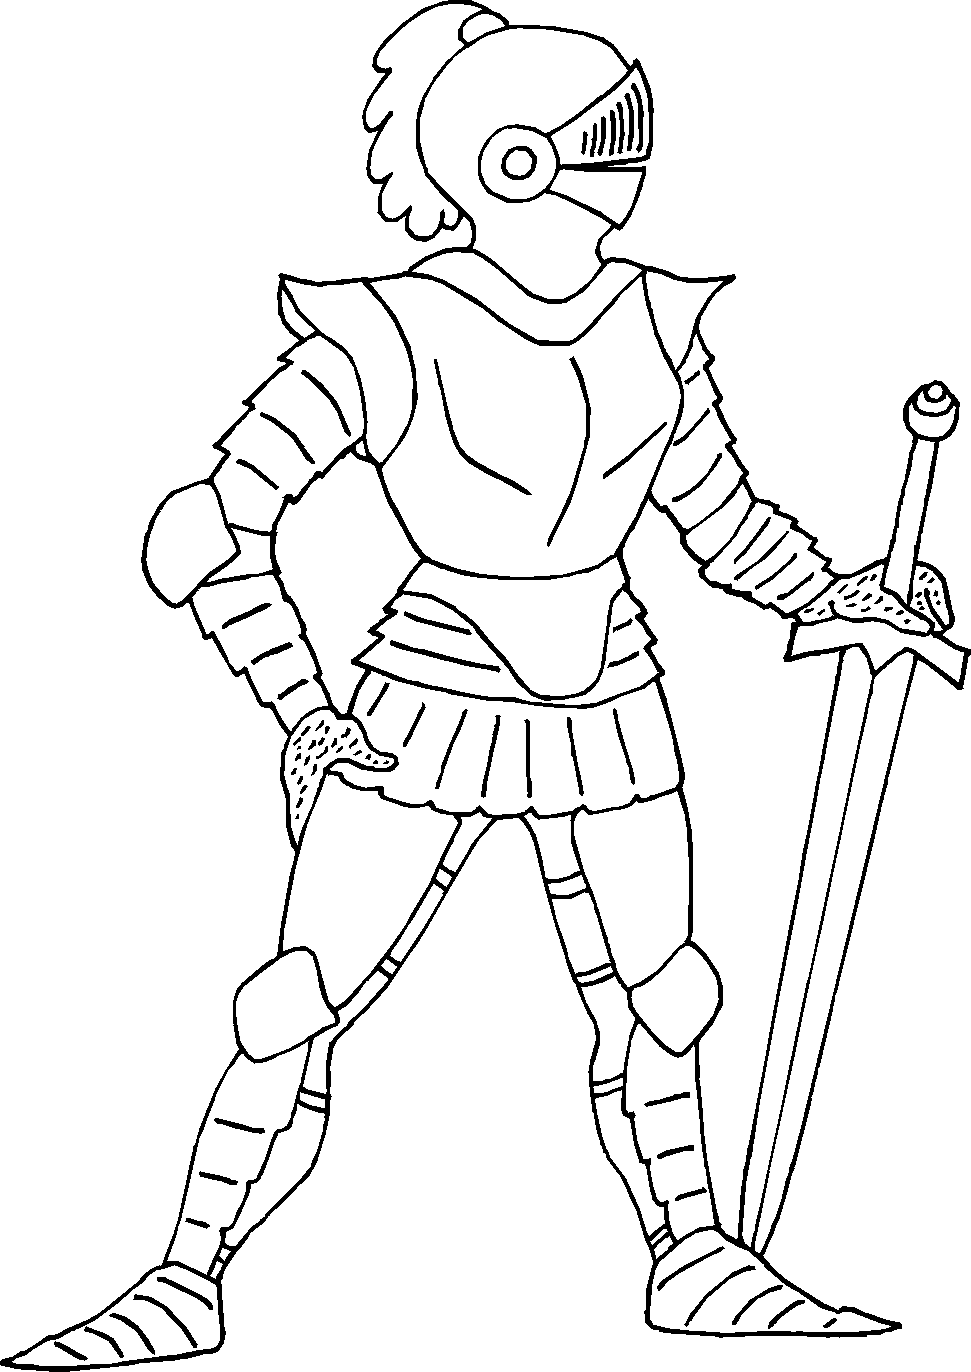 Knights Coloring Pages Free Printable Knight Coloring Sheets | My XXX ...